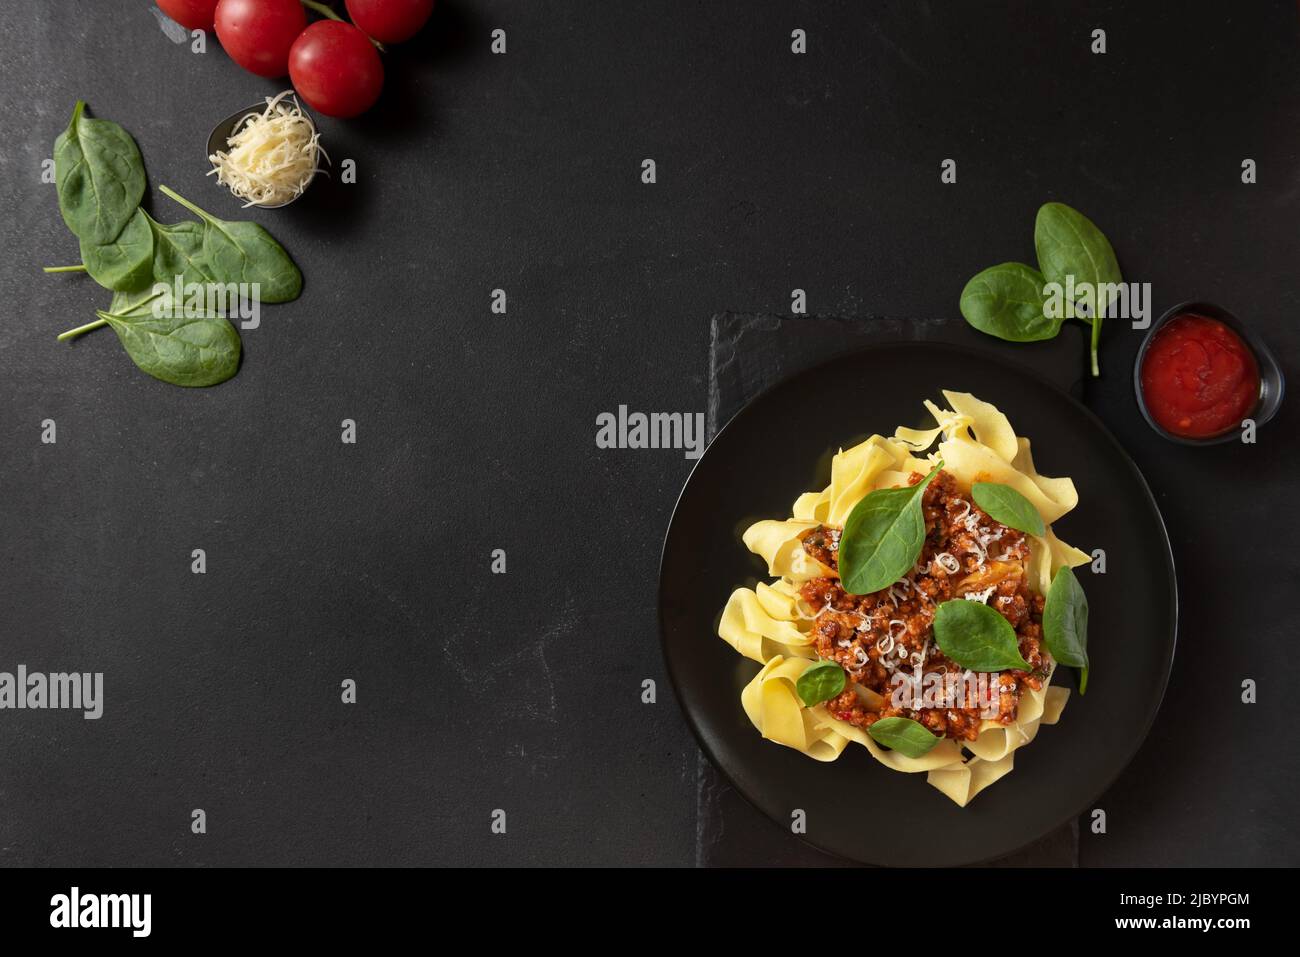 Classic food in Italy. Pasta with bolognese sauce on a black plate Stock Photo